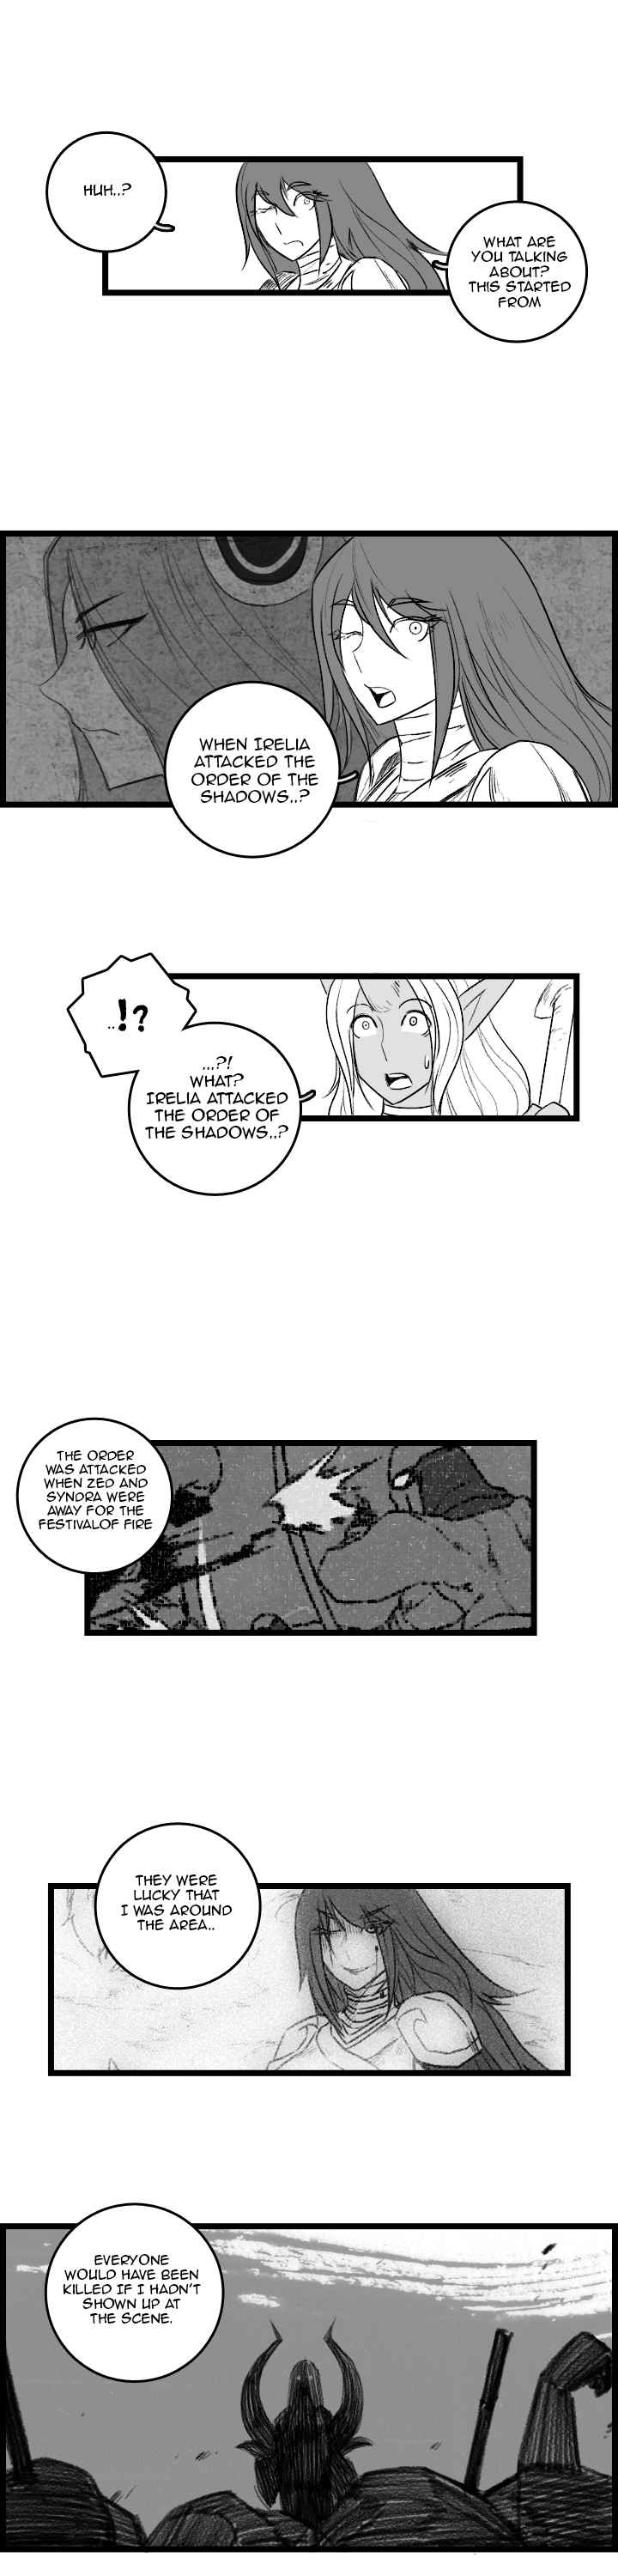 League of Legends Syndra & Zed's Everyday Life (Doujinshi) Vol. 3 Ch. 36